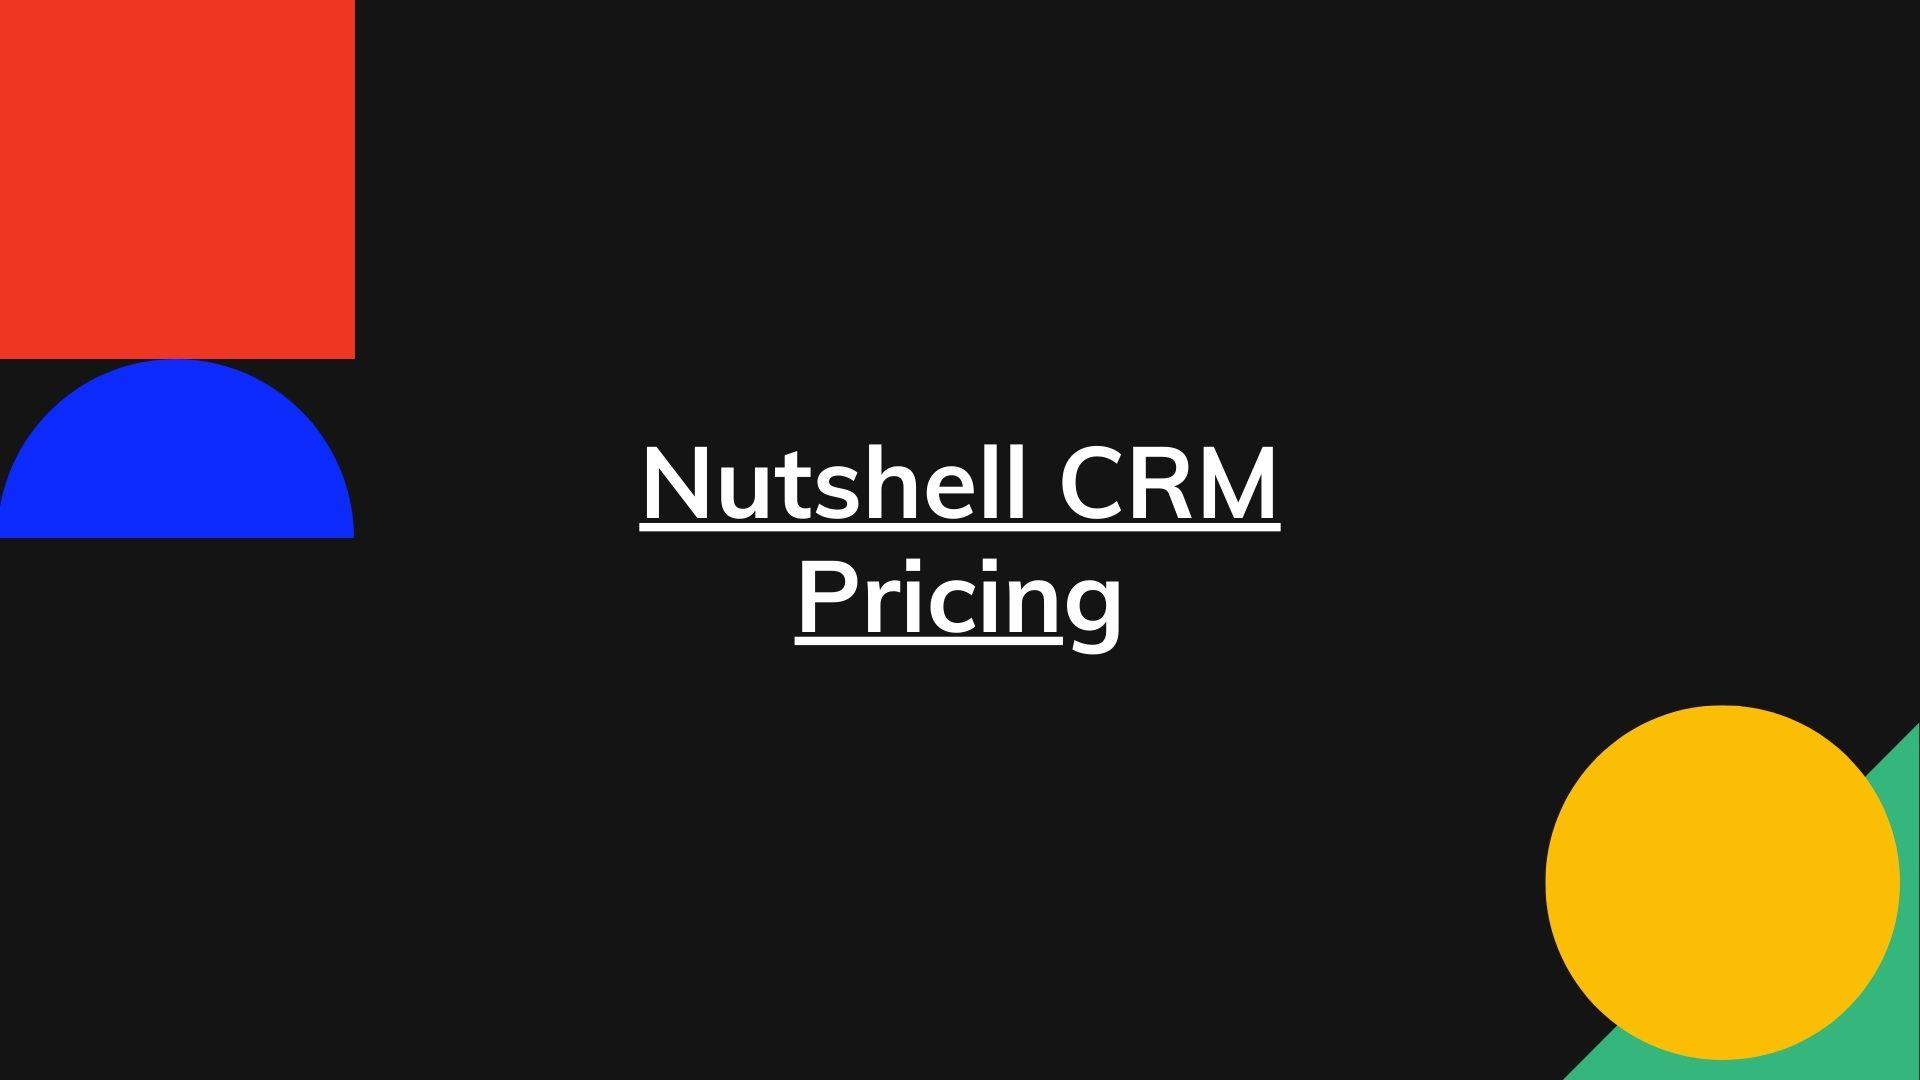 Nutshell Pricing – Actual Prices For All Plans